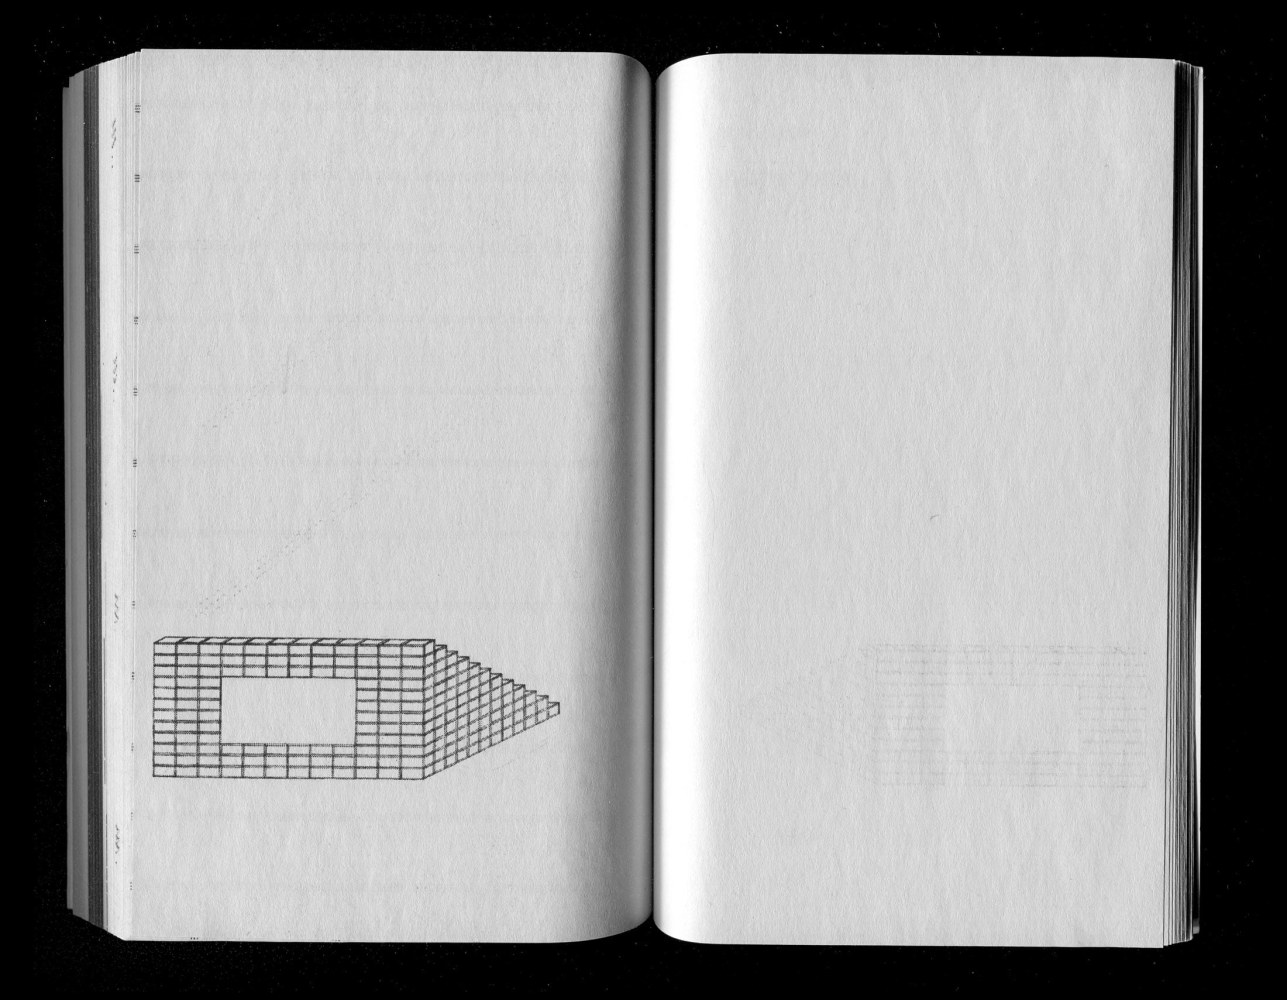 Jonathan Berger
Prologues, Epilogues, Thresholds: An Exhiibtion in Three Parts, 2007
With contributions by Carol Bove, Judith Dupr&amp;eacute;, Esther Kaplan, Mady Schutzman, David Serlin, and Jasmin Tsou
Published by Andreas Grimm Gallery
​Designed by Julian Bittiner